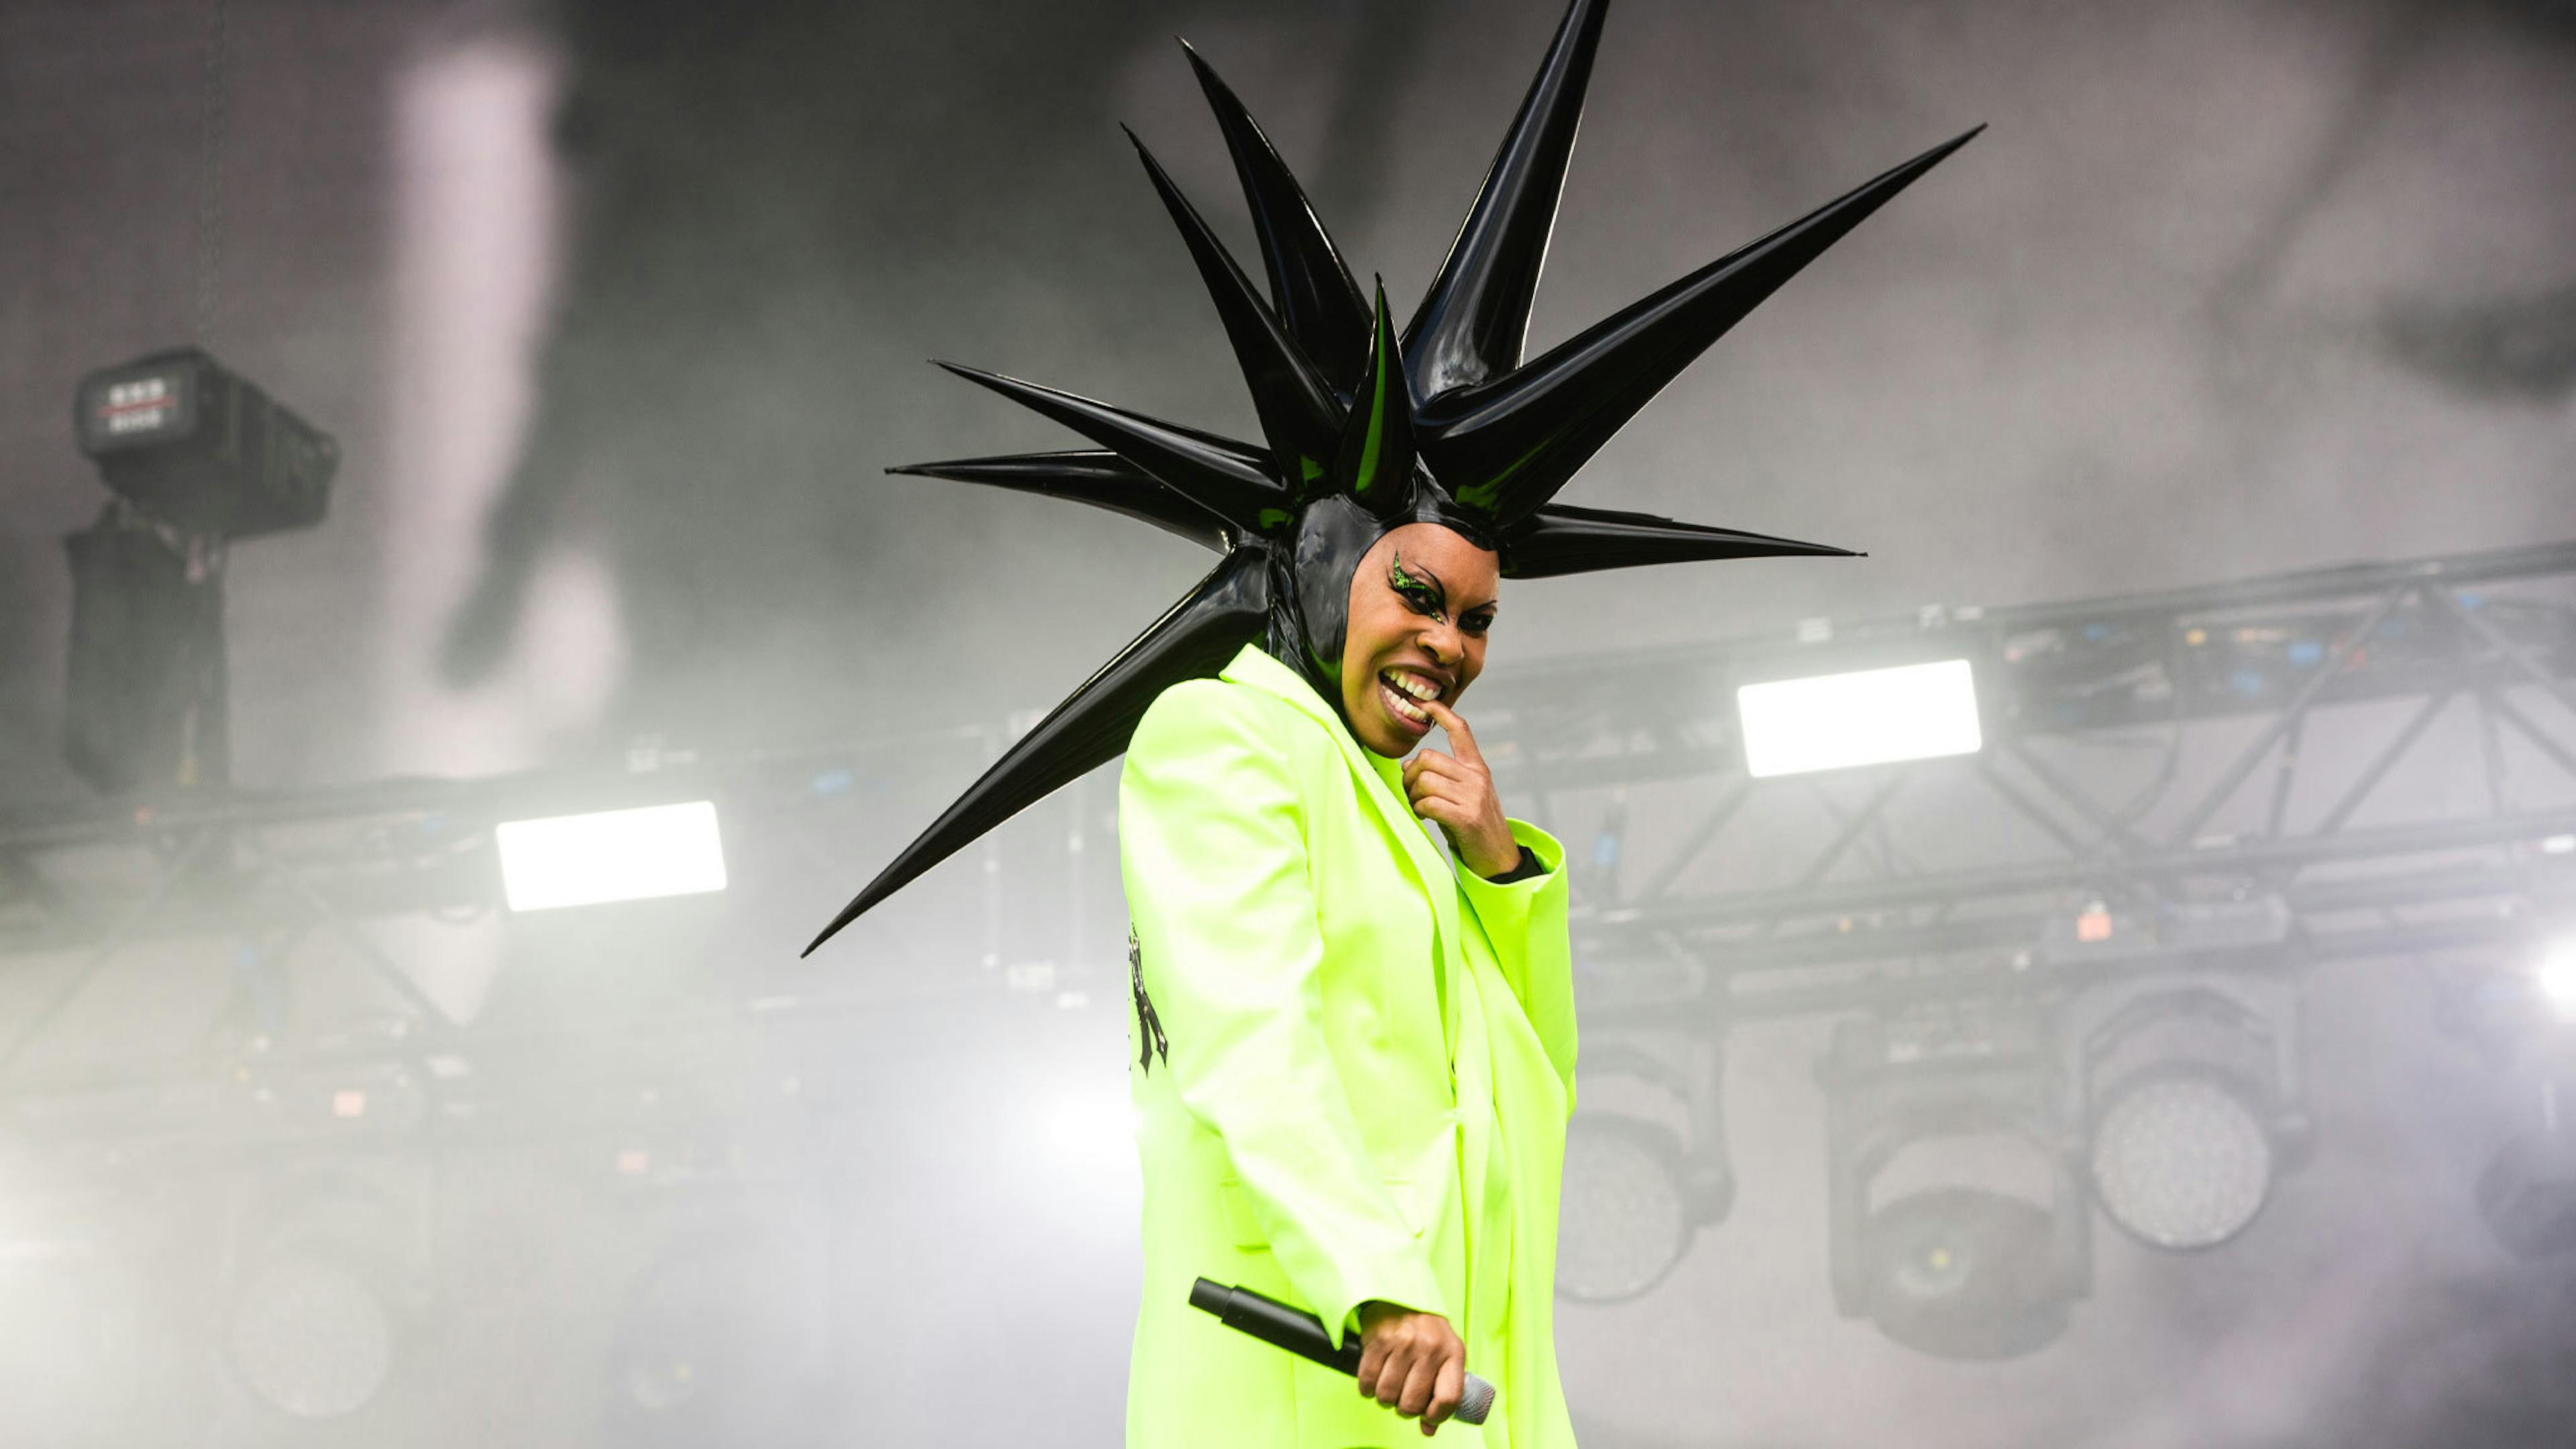 In pictures: All the highlights from Glastonbury 2022